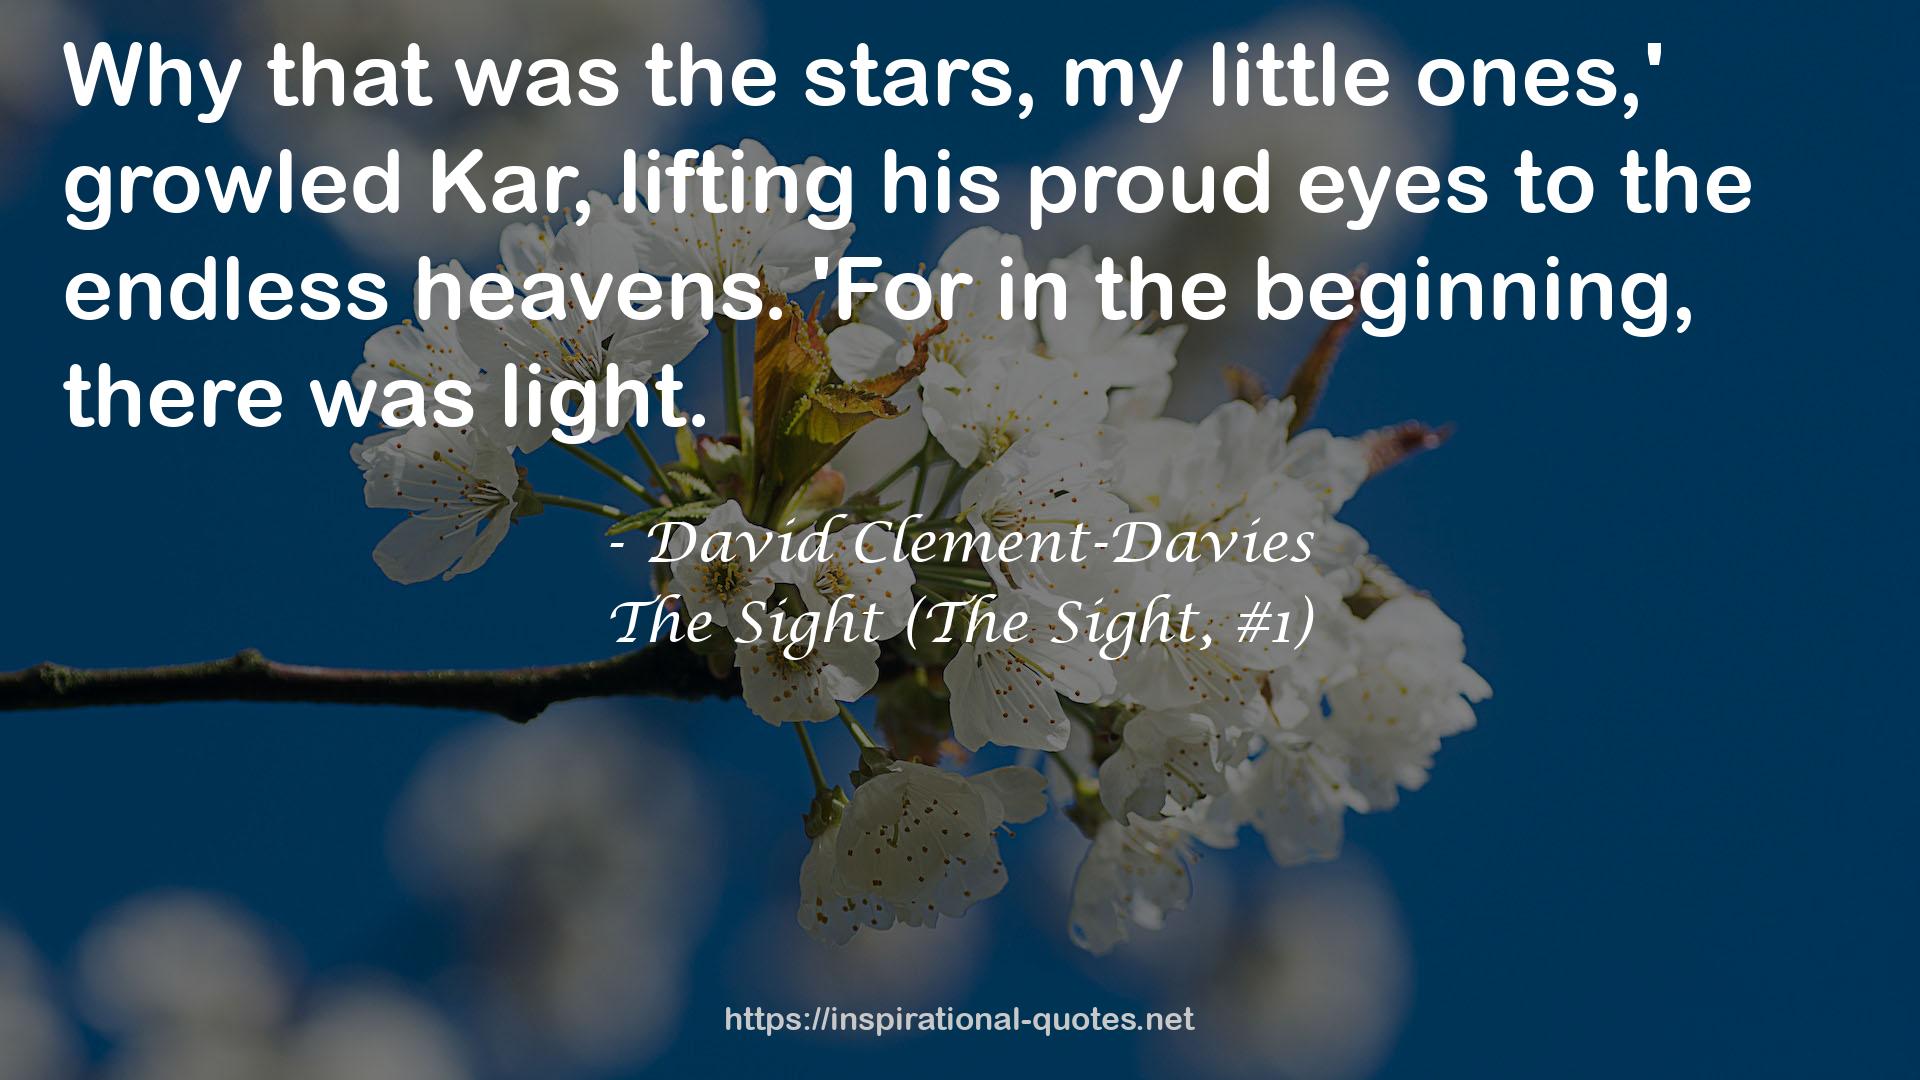 The Sight (The Sight, #1) QUOTES